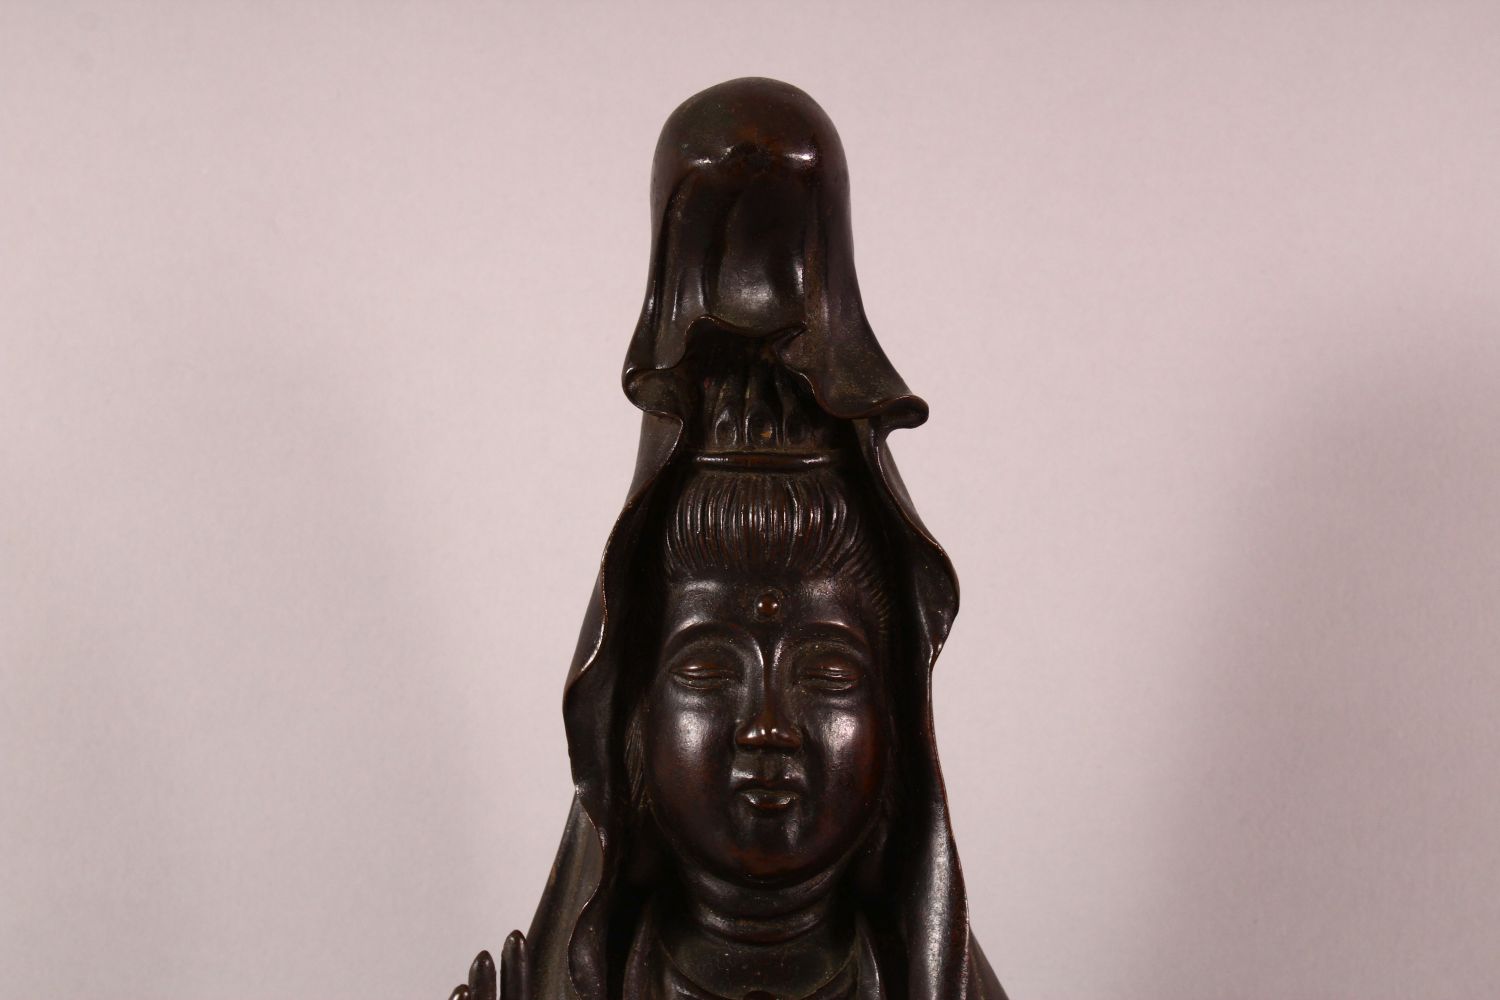 A CHINESE BRONZE FIGURE OF GUANYIN holding a scroll, her other hand raised in a mindfulness gesture, - Image 5 of 8